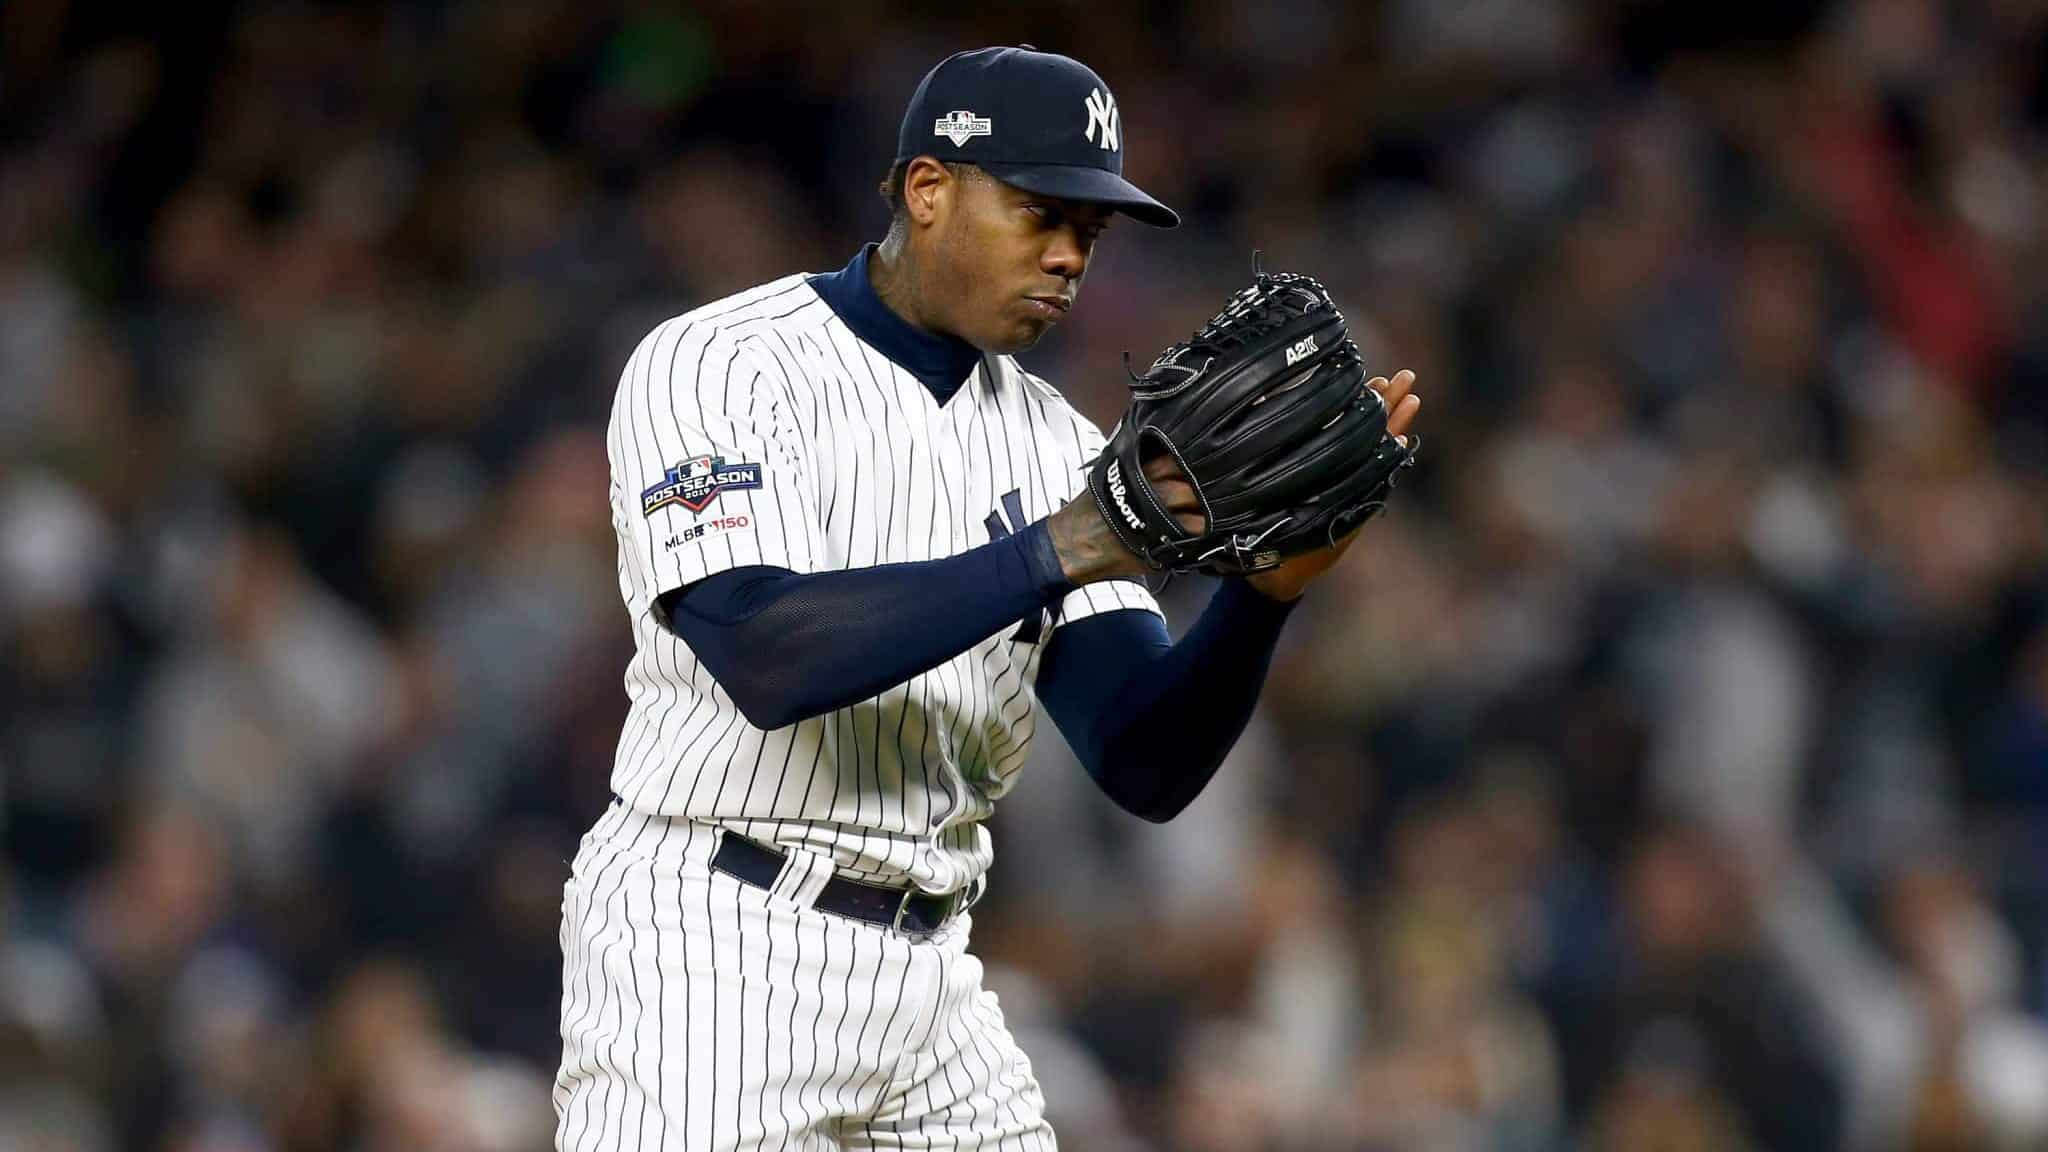 NEW YORK, NEW YORK - OCTOBER 18: Aroldis Chapman #54 of the New York Yankees looks on against the Houston Astros during the ninth inning in game five of the American League Championship Series at Yankee Stadium on October 18, 2019 in New York City.